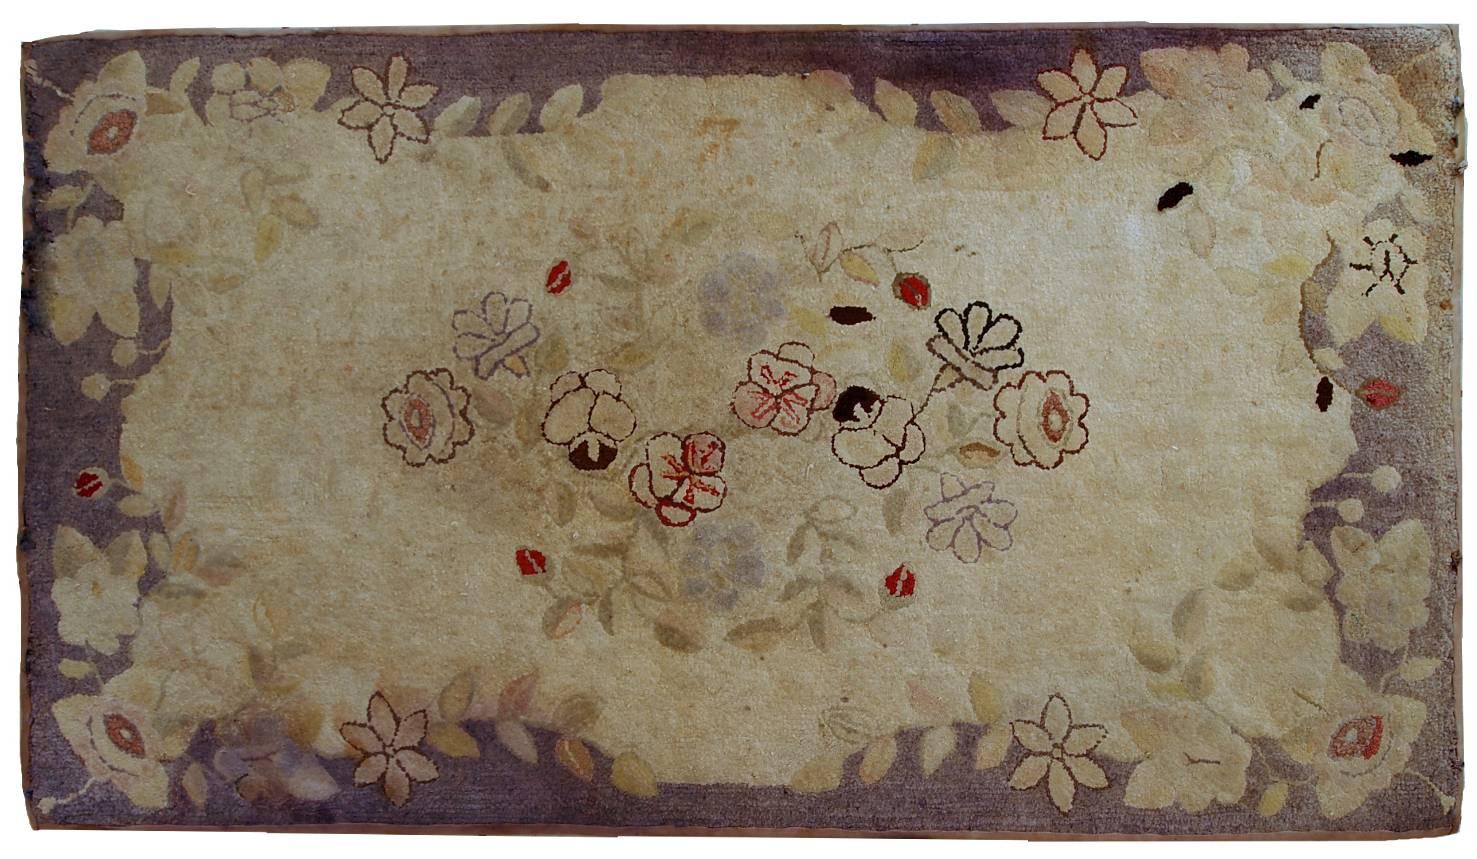 Handmade antique American Primitive hooked rug in beige shade with abstract/floral design. The border is purple. It is in good condition, has minimal restorations on the ends.
 